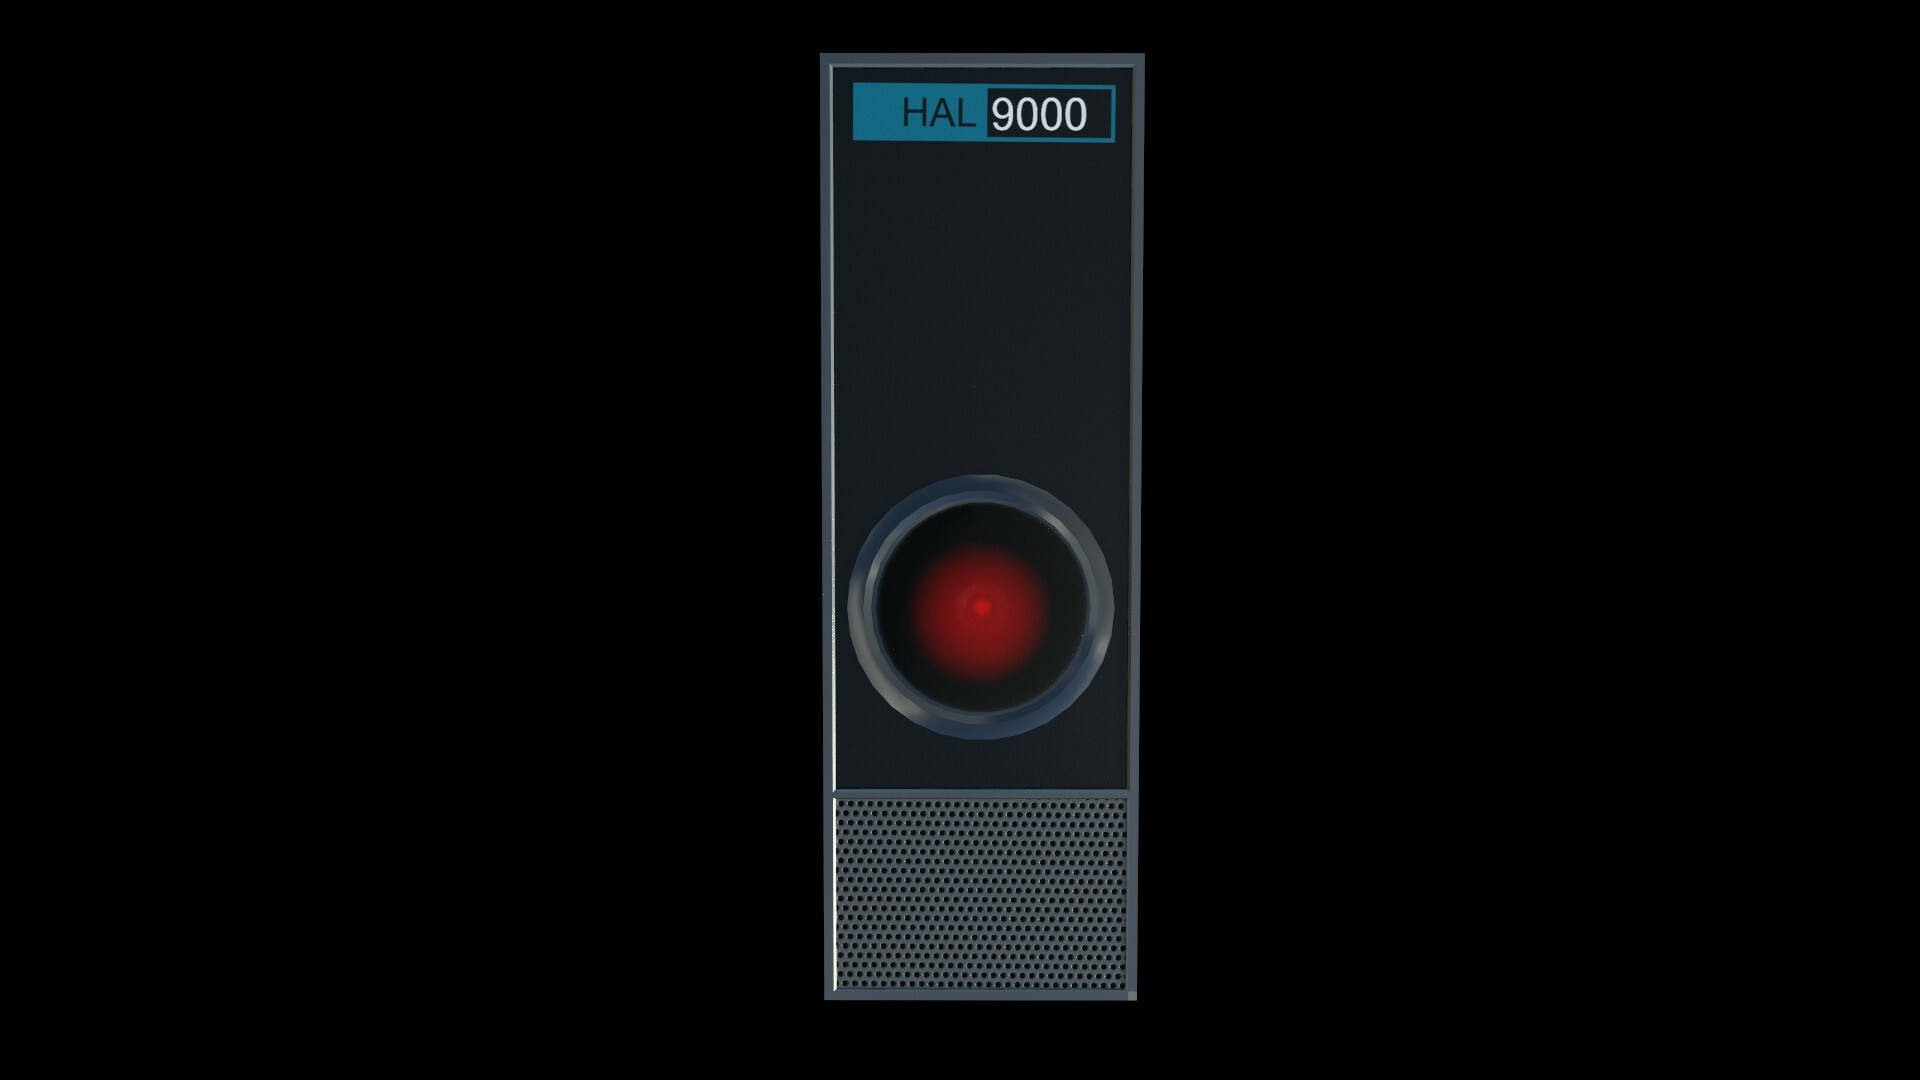 Hal 9000 Supervising The Launch Of A Space Mission. Background